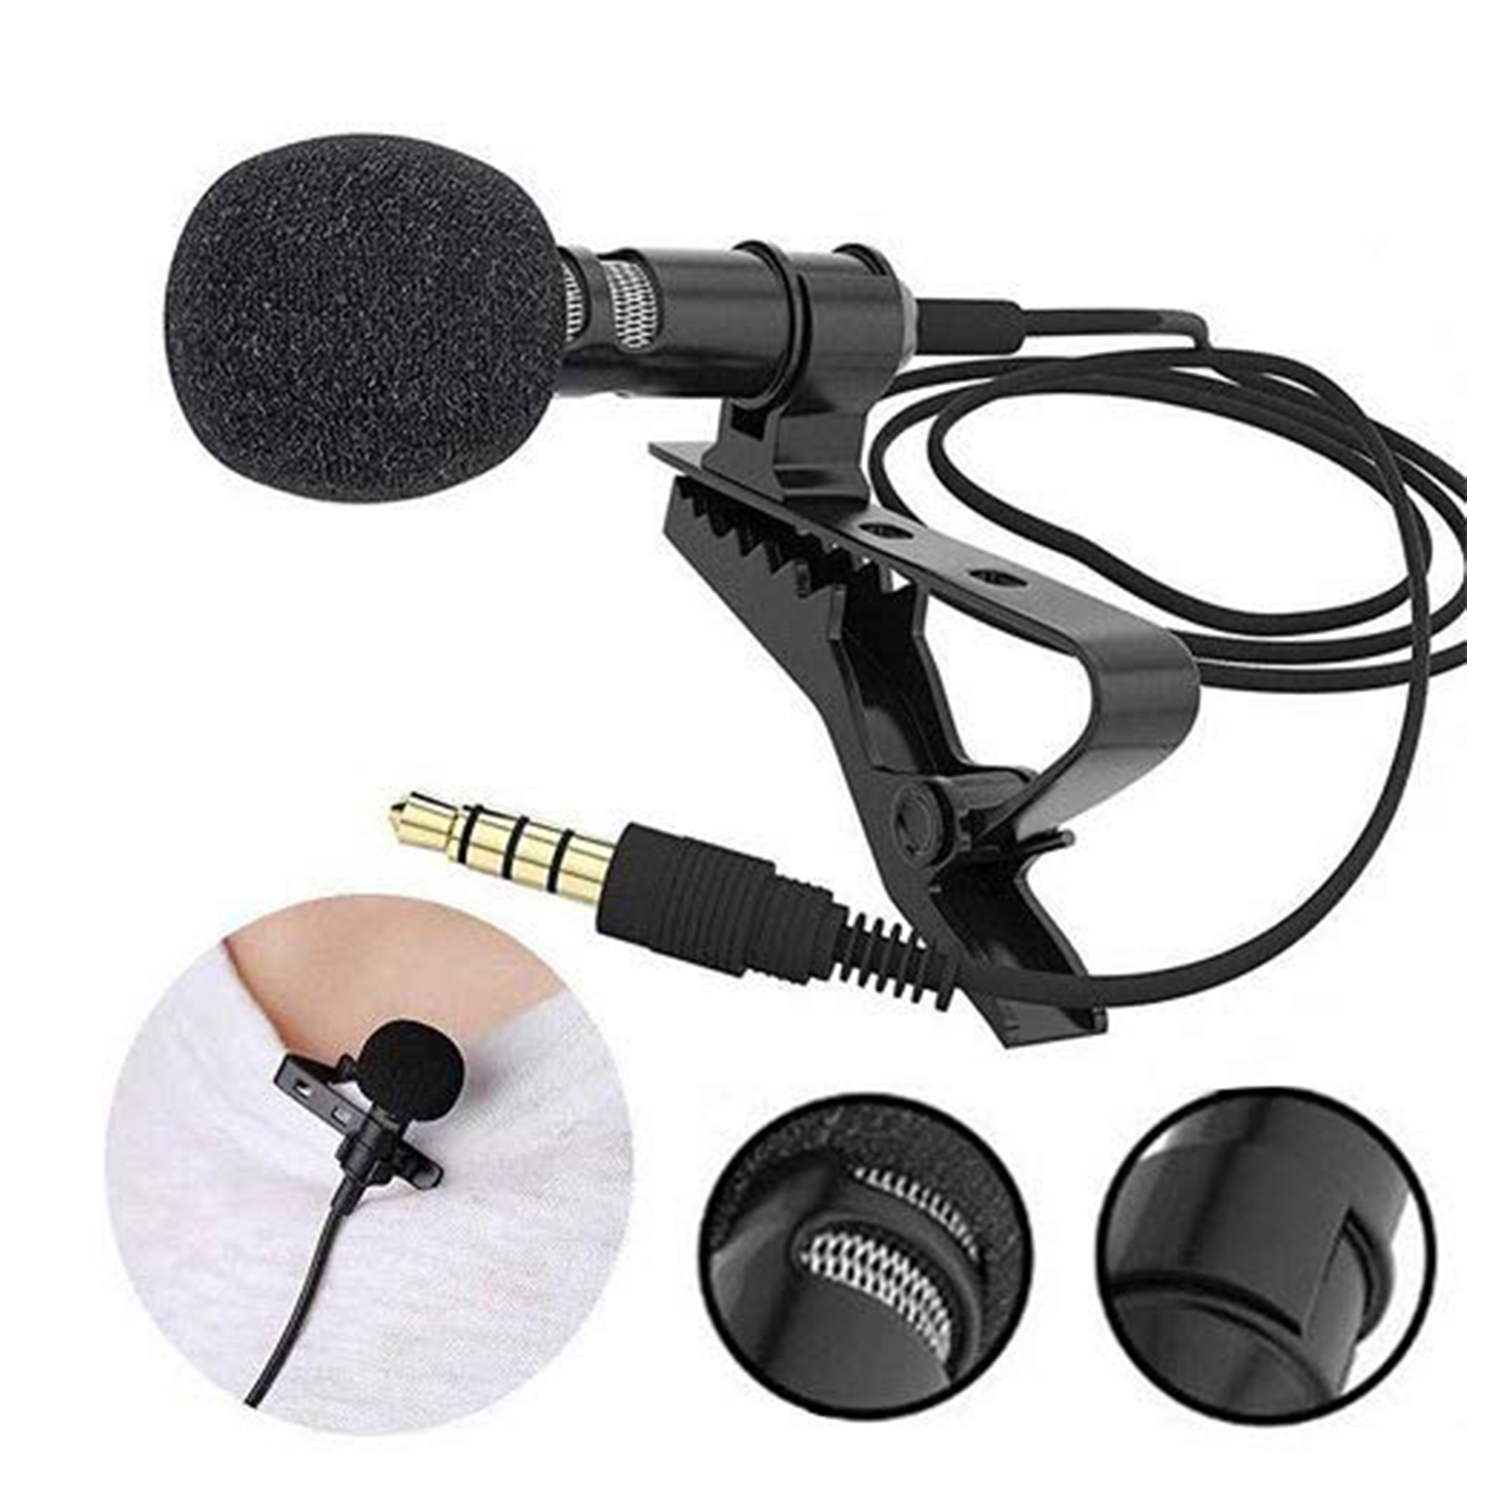 RD M-1 India Caller mic 1.5mm /Clip Microphone for YouTube, Collar Mike, Voice Recording (Black)